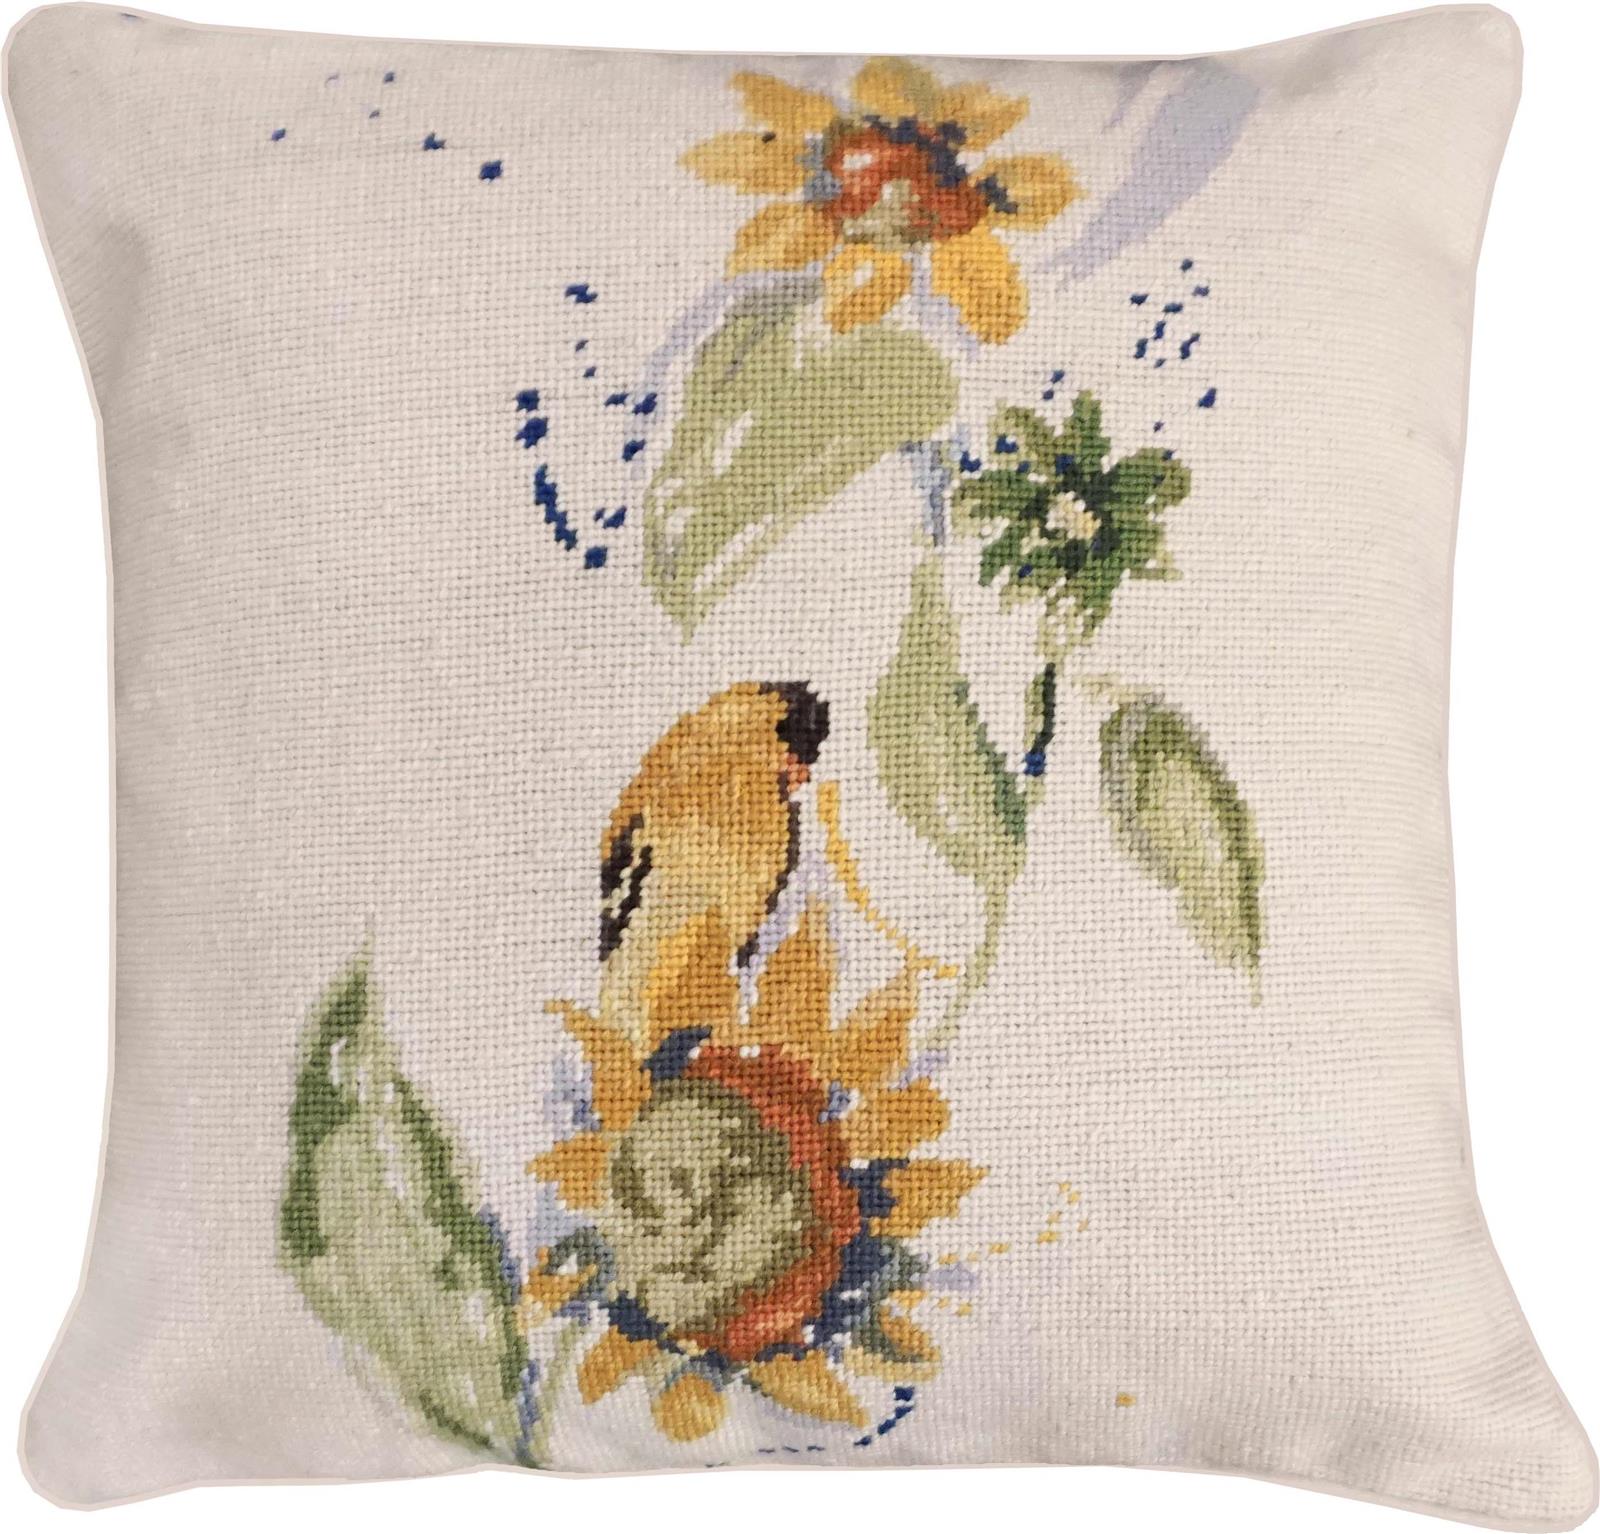 Pillow Throw Needlepoint Goldfinch With Sunflower 18x18 Gold Yellow Down Insert-Image 1